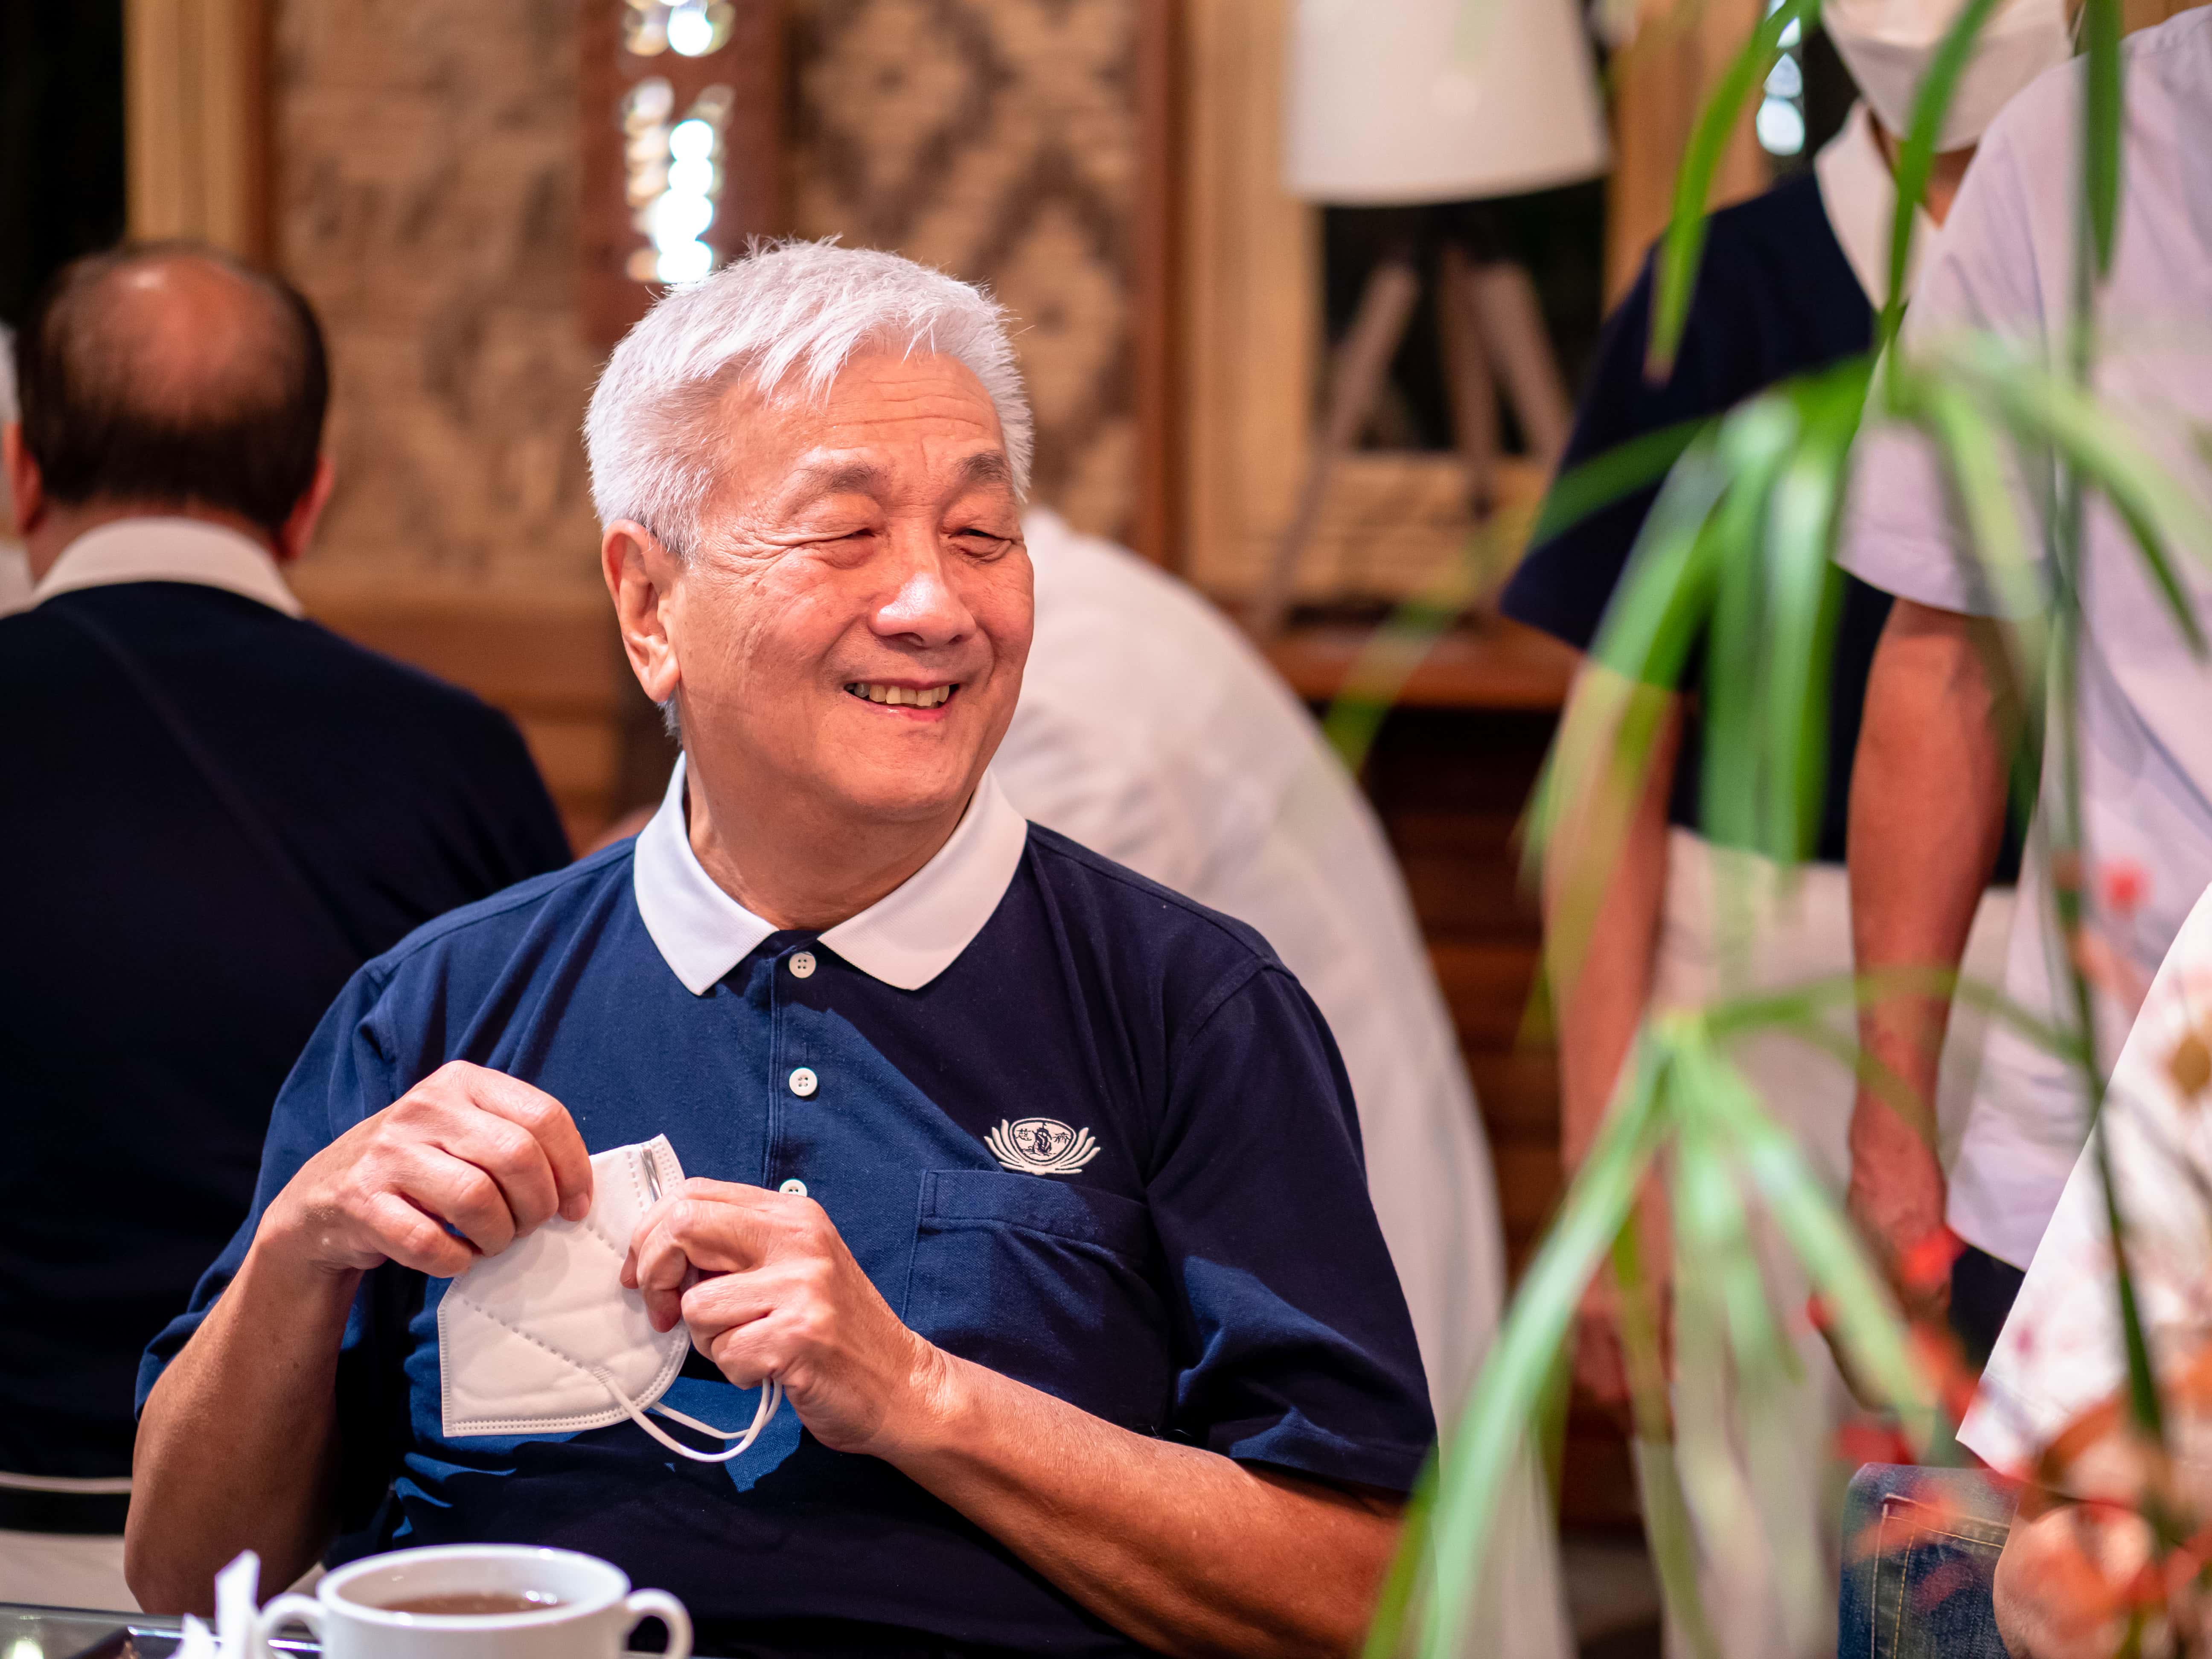 Tzu Chi CEO Henry Yunez enjoying time with guests in the Coffee Shop.【Photo by Daniel Lazar】